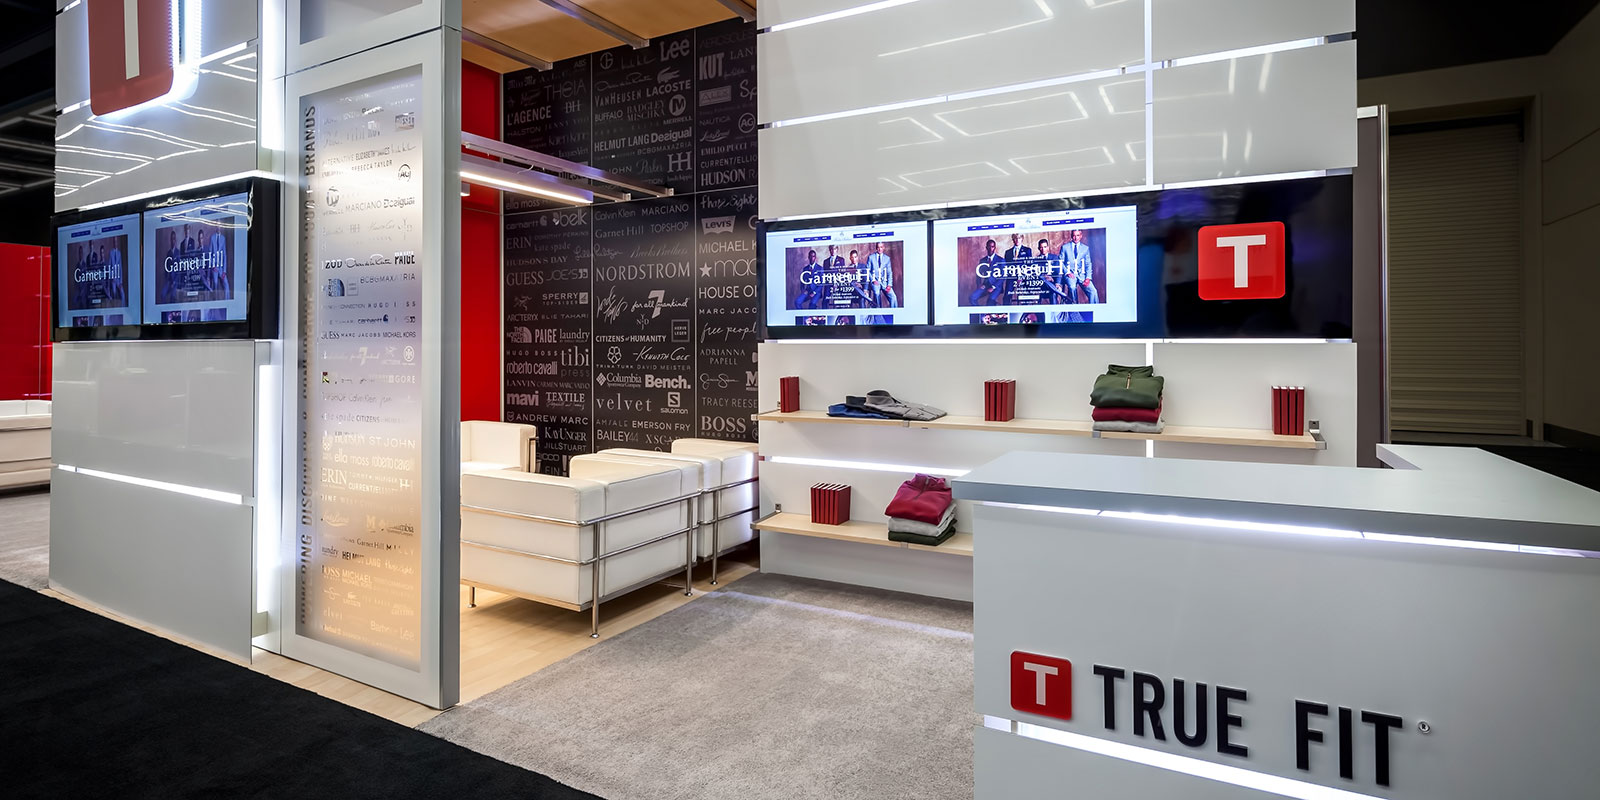 Hill & Partners Rental Branded Environment Trade Show Exhibit for True Fit